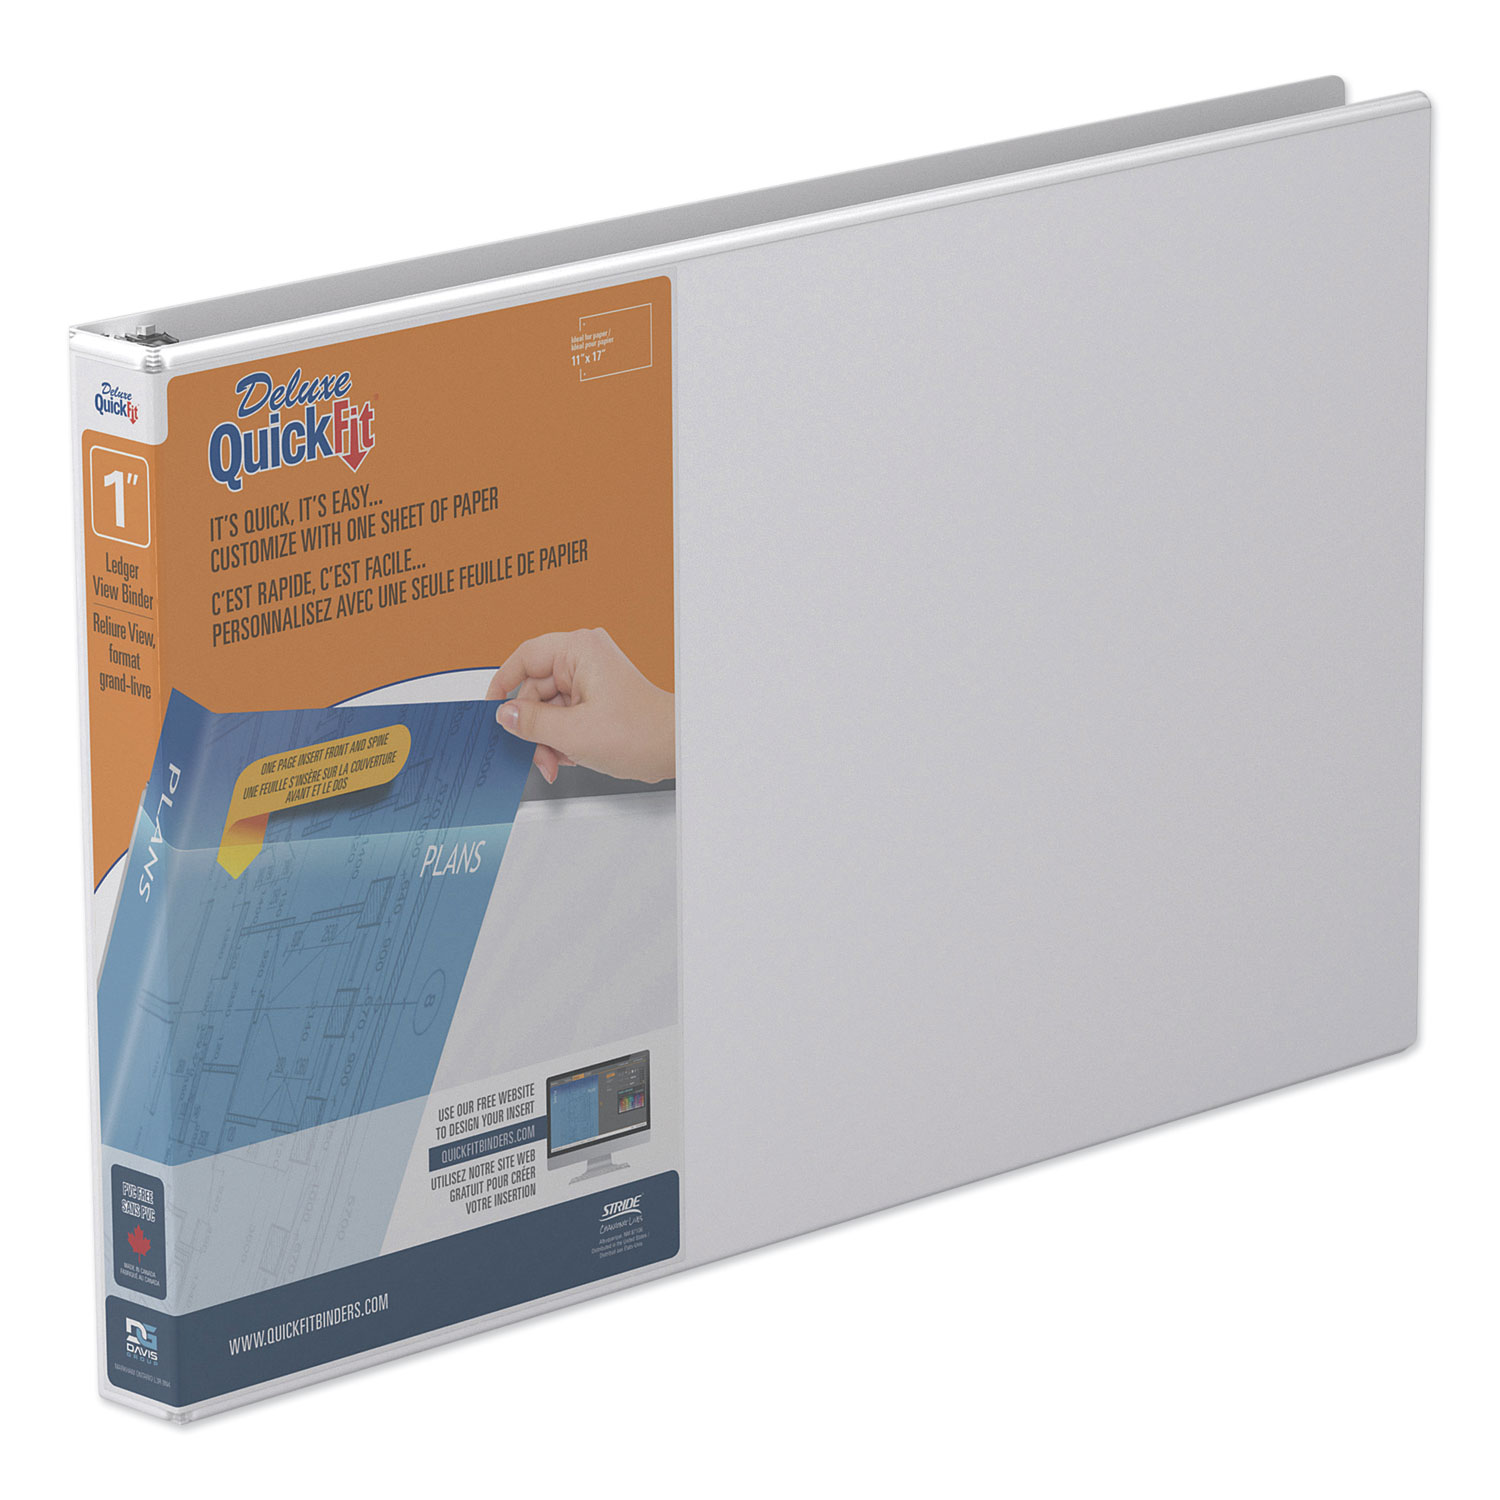  Stride 94010 QuickFit Ledger D-Ring View Binder, 3 Rings, 1 Capacity, 11 x 17, White (STW94010) 